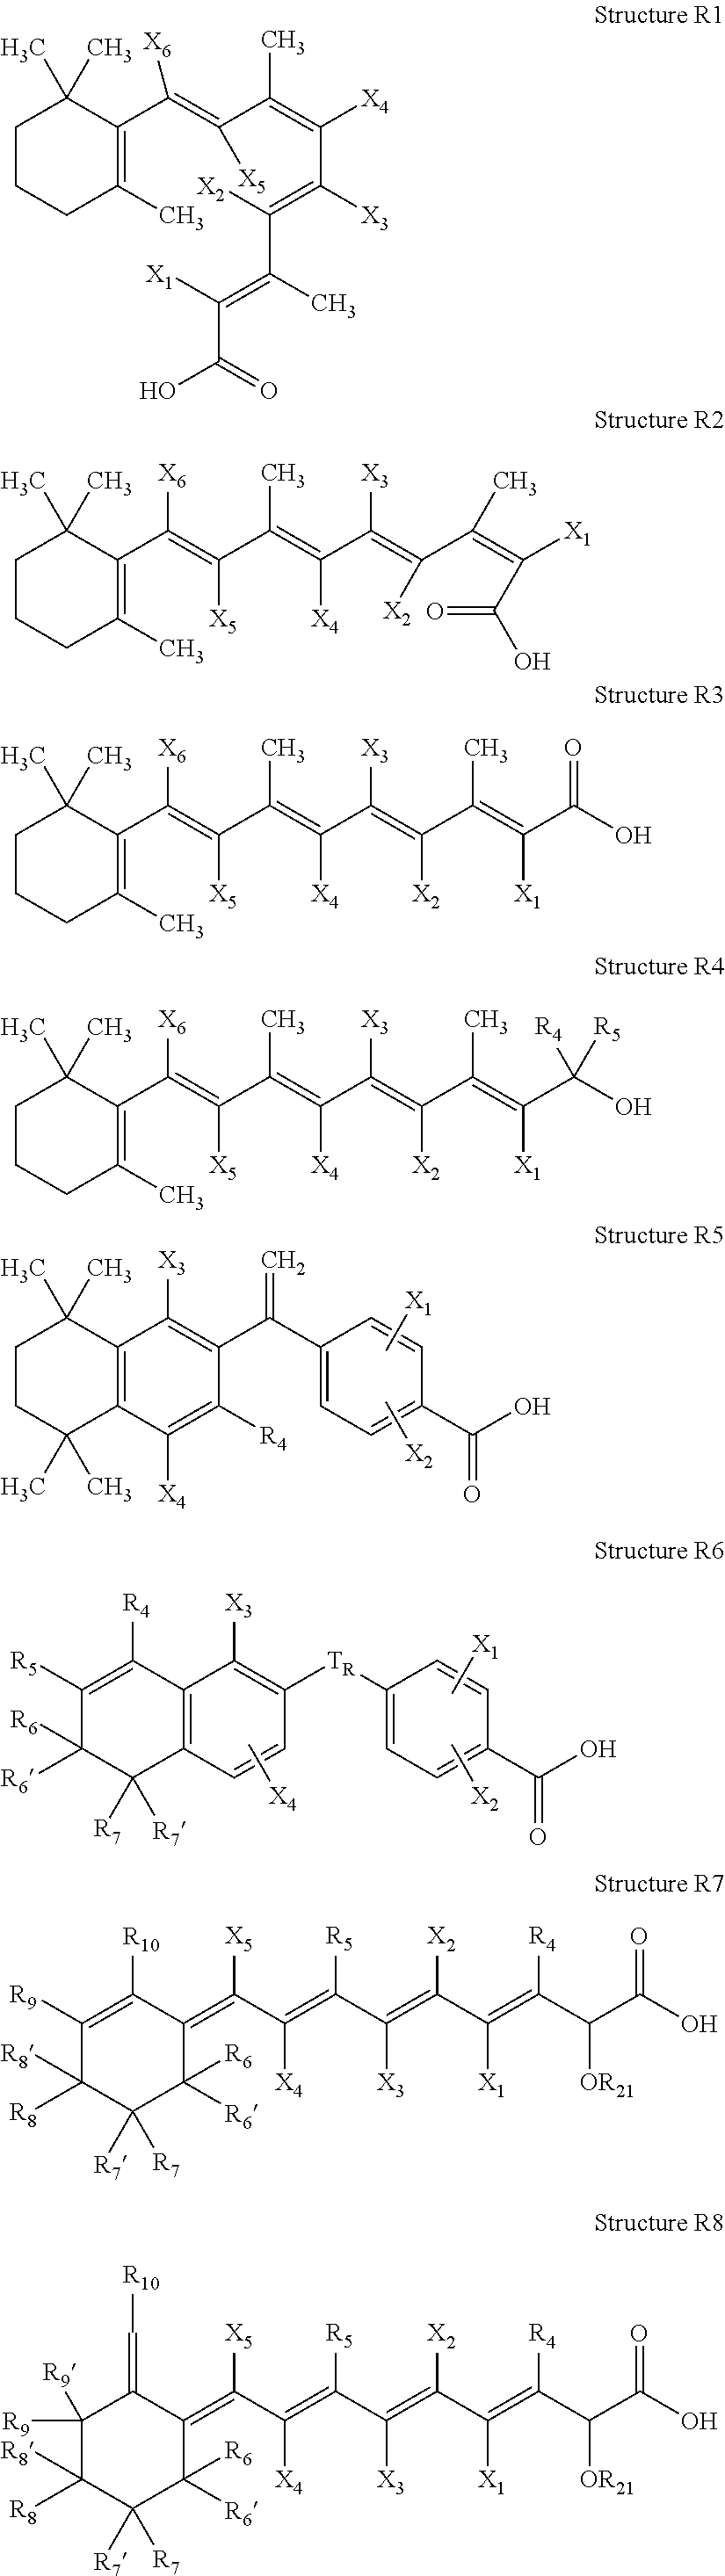 High penetration prodrug compositions of retinoids and retinoid-related compounds